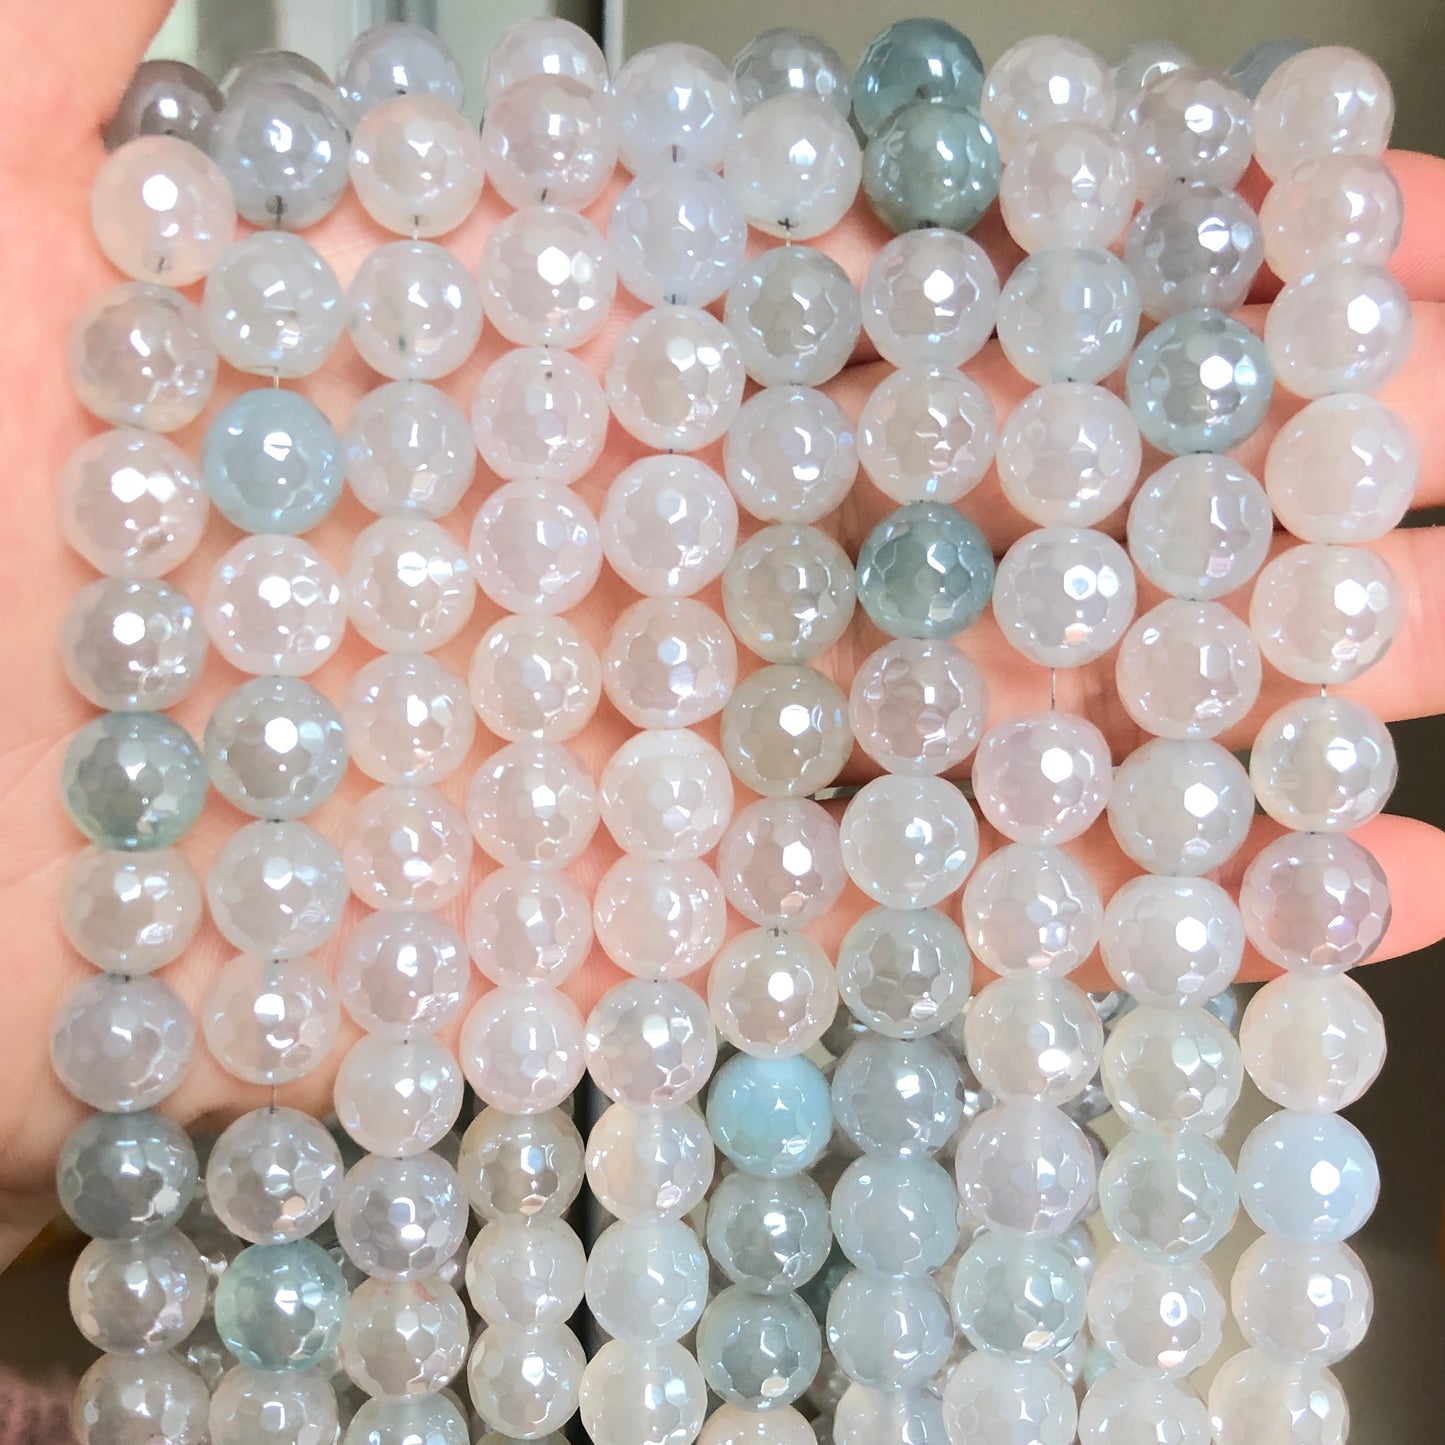 2 Strands/lot 10mm Electroplated Clear Light Blue Agate Faceted Stone Beads Electroplated Beads Electroplated Faceted Agate Beads New Beads Arrivals Charms Beads Beyond